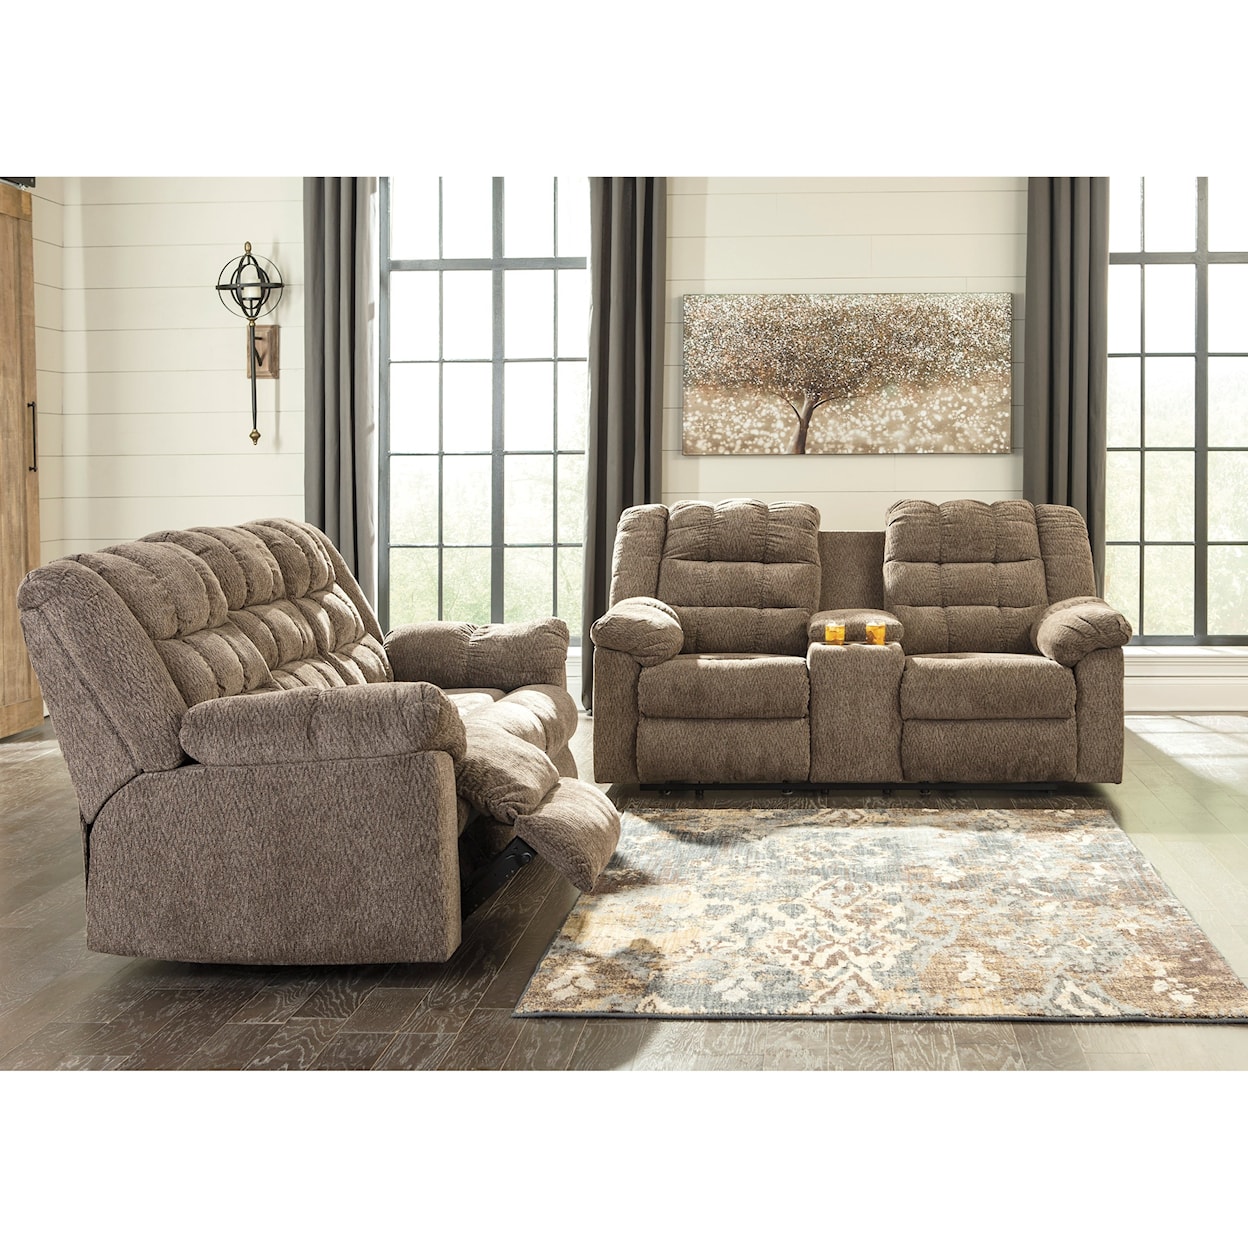 Signature Design by Ashley Furniture Workhorse Reclining Living Room Group